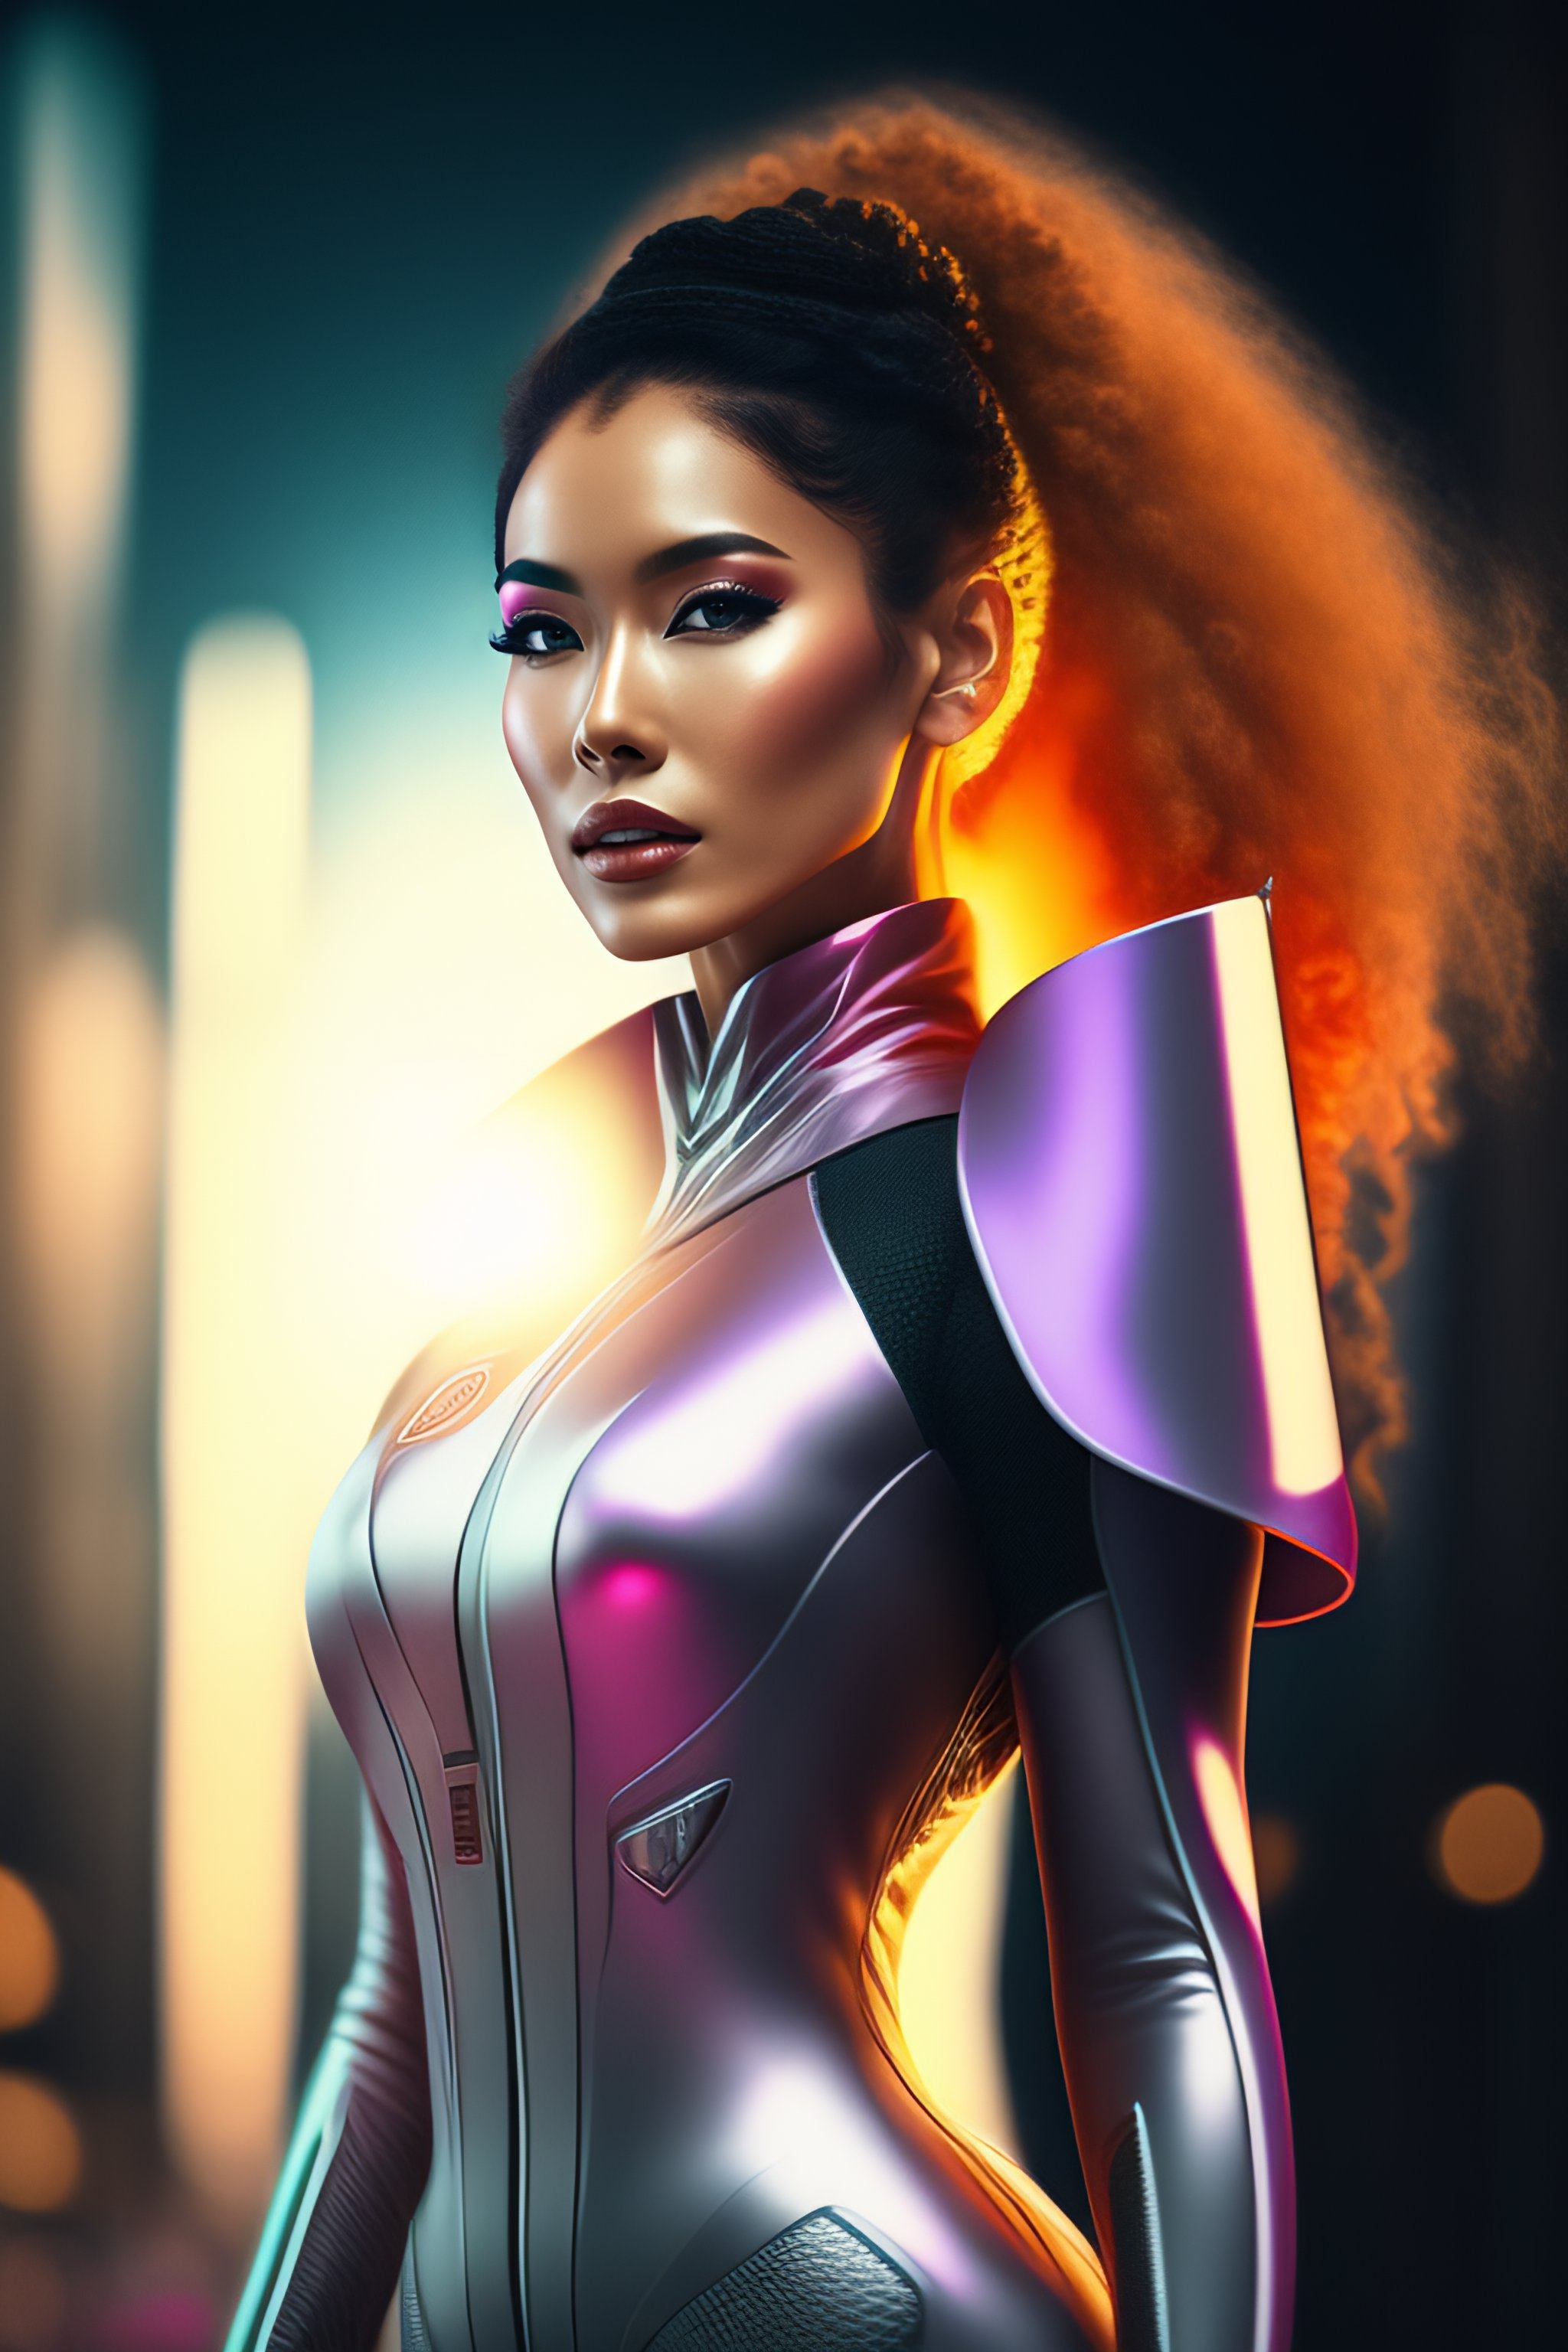 Lexica - A woman wearing a futuristic outfit